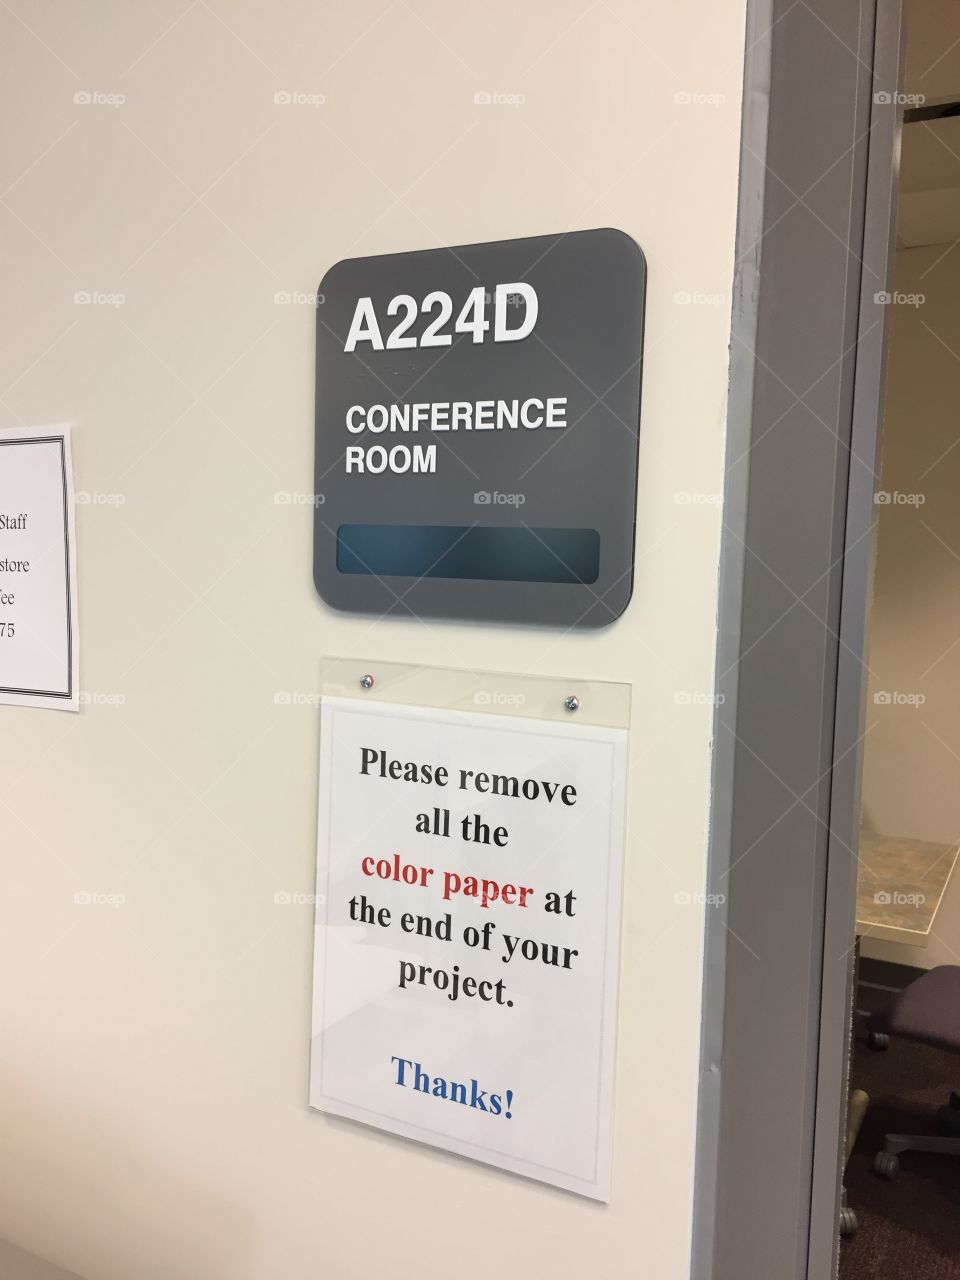 Standard office sign posted at doorway